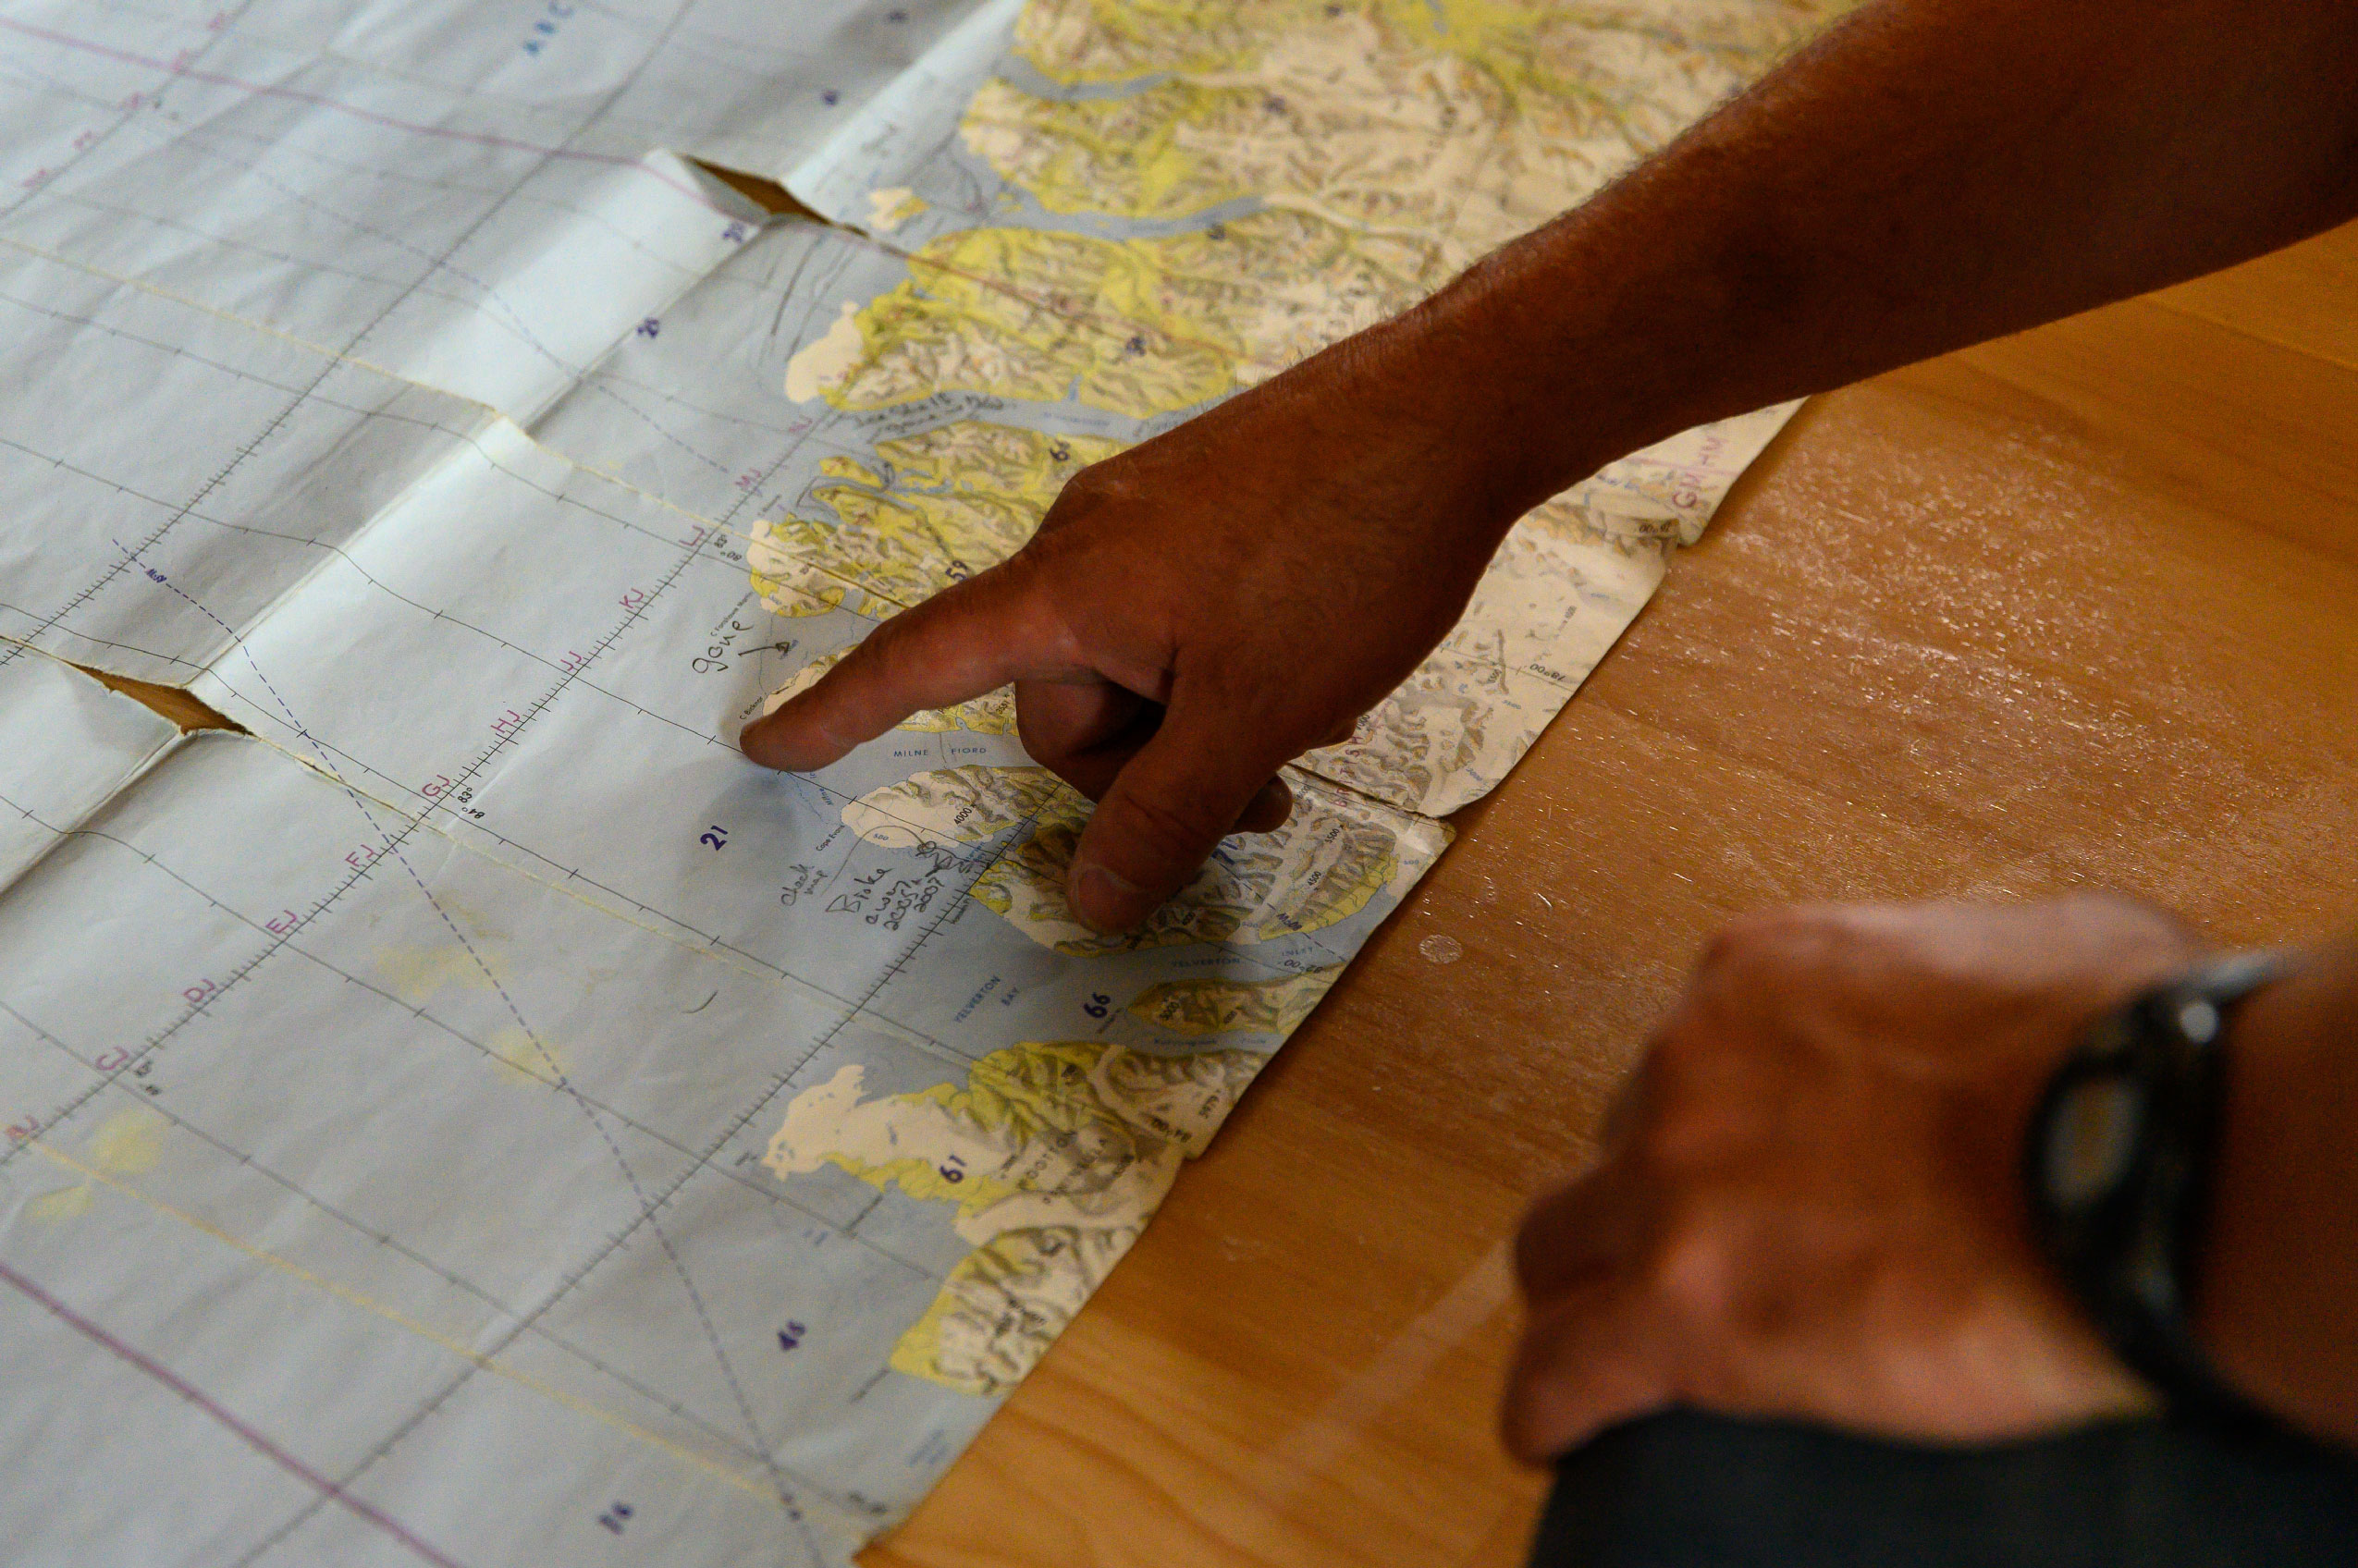 During a pre-trip meeting in Resolute, glaciologist Derek Mueller points to a map of Ellesmere Island, complete with notes indicating when various ice shelves in the region collapsed. The shelves are land-fast platforms of ice flowing away from a glacier to the opening of the inlet on the ocean. A century ago, the northern coast of Ellesmere was wrapped in a continuous edge of ice. Now, only bits and pieces of various shelves remain in the island’s deep fiords.